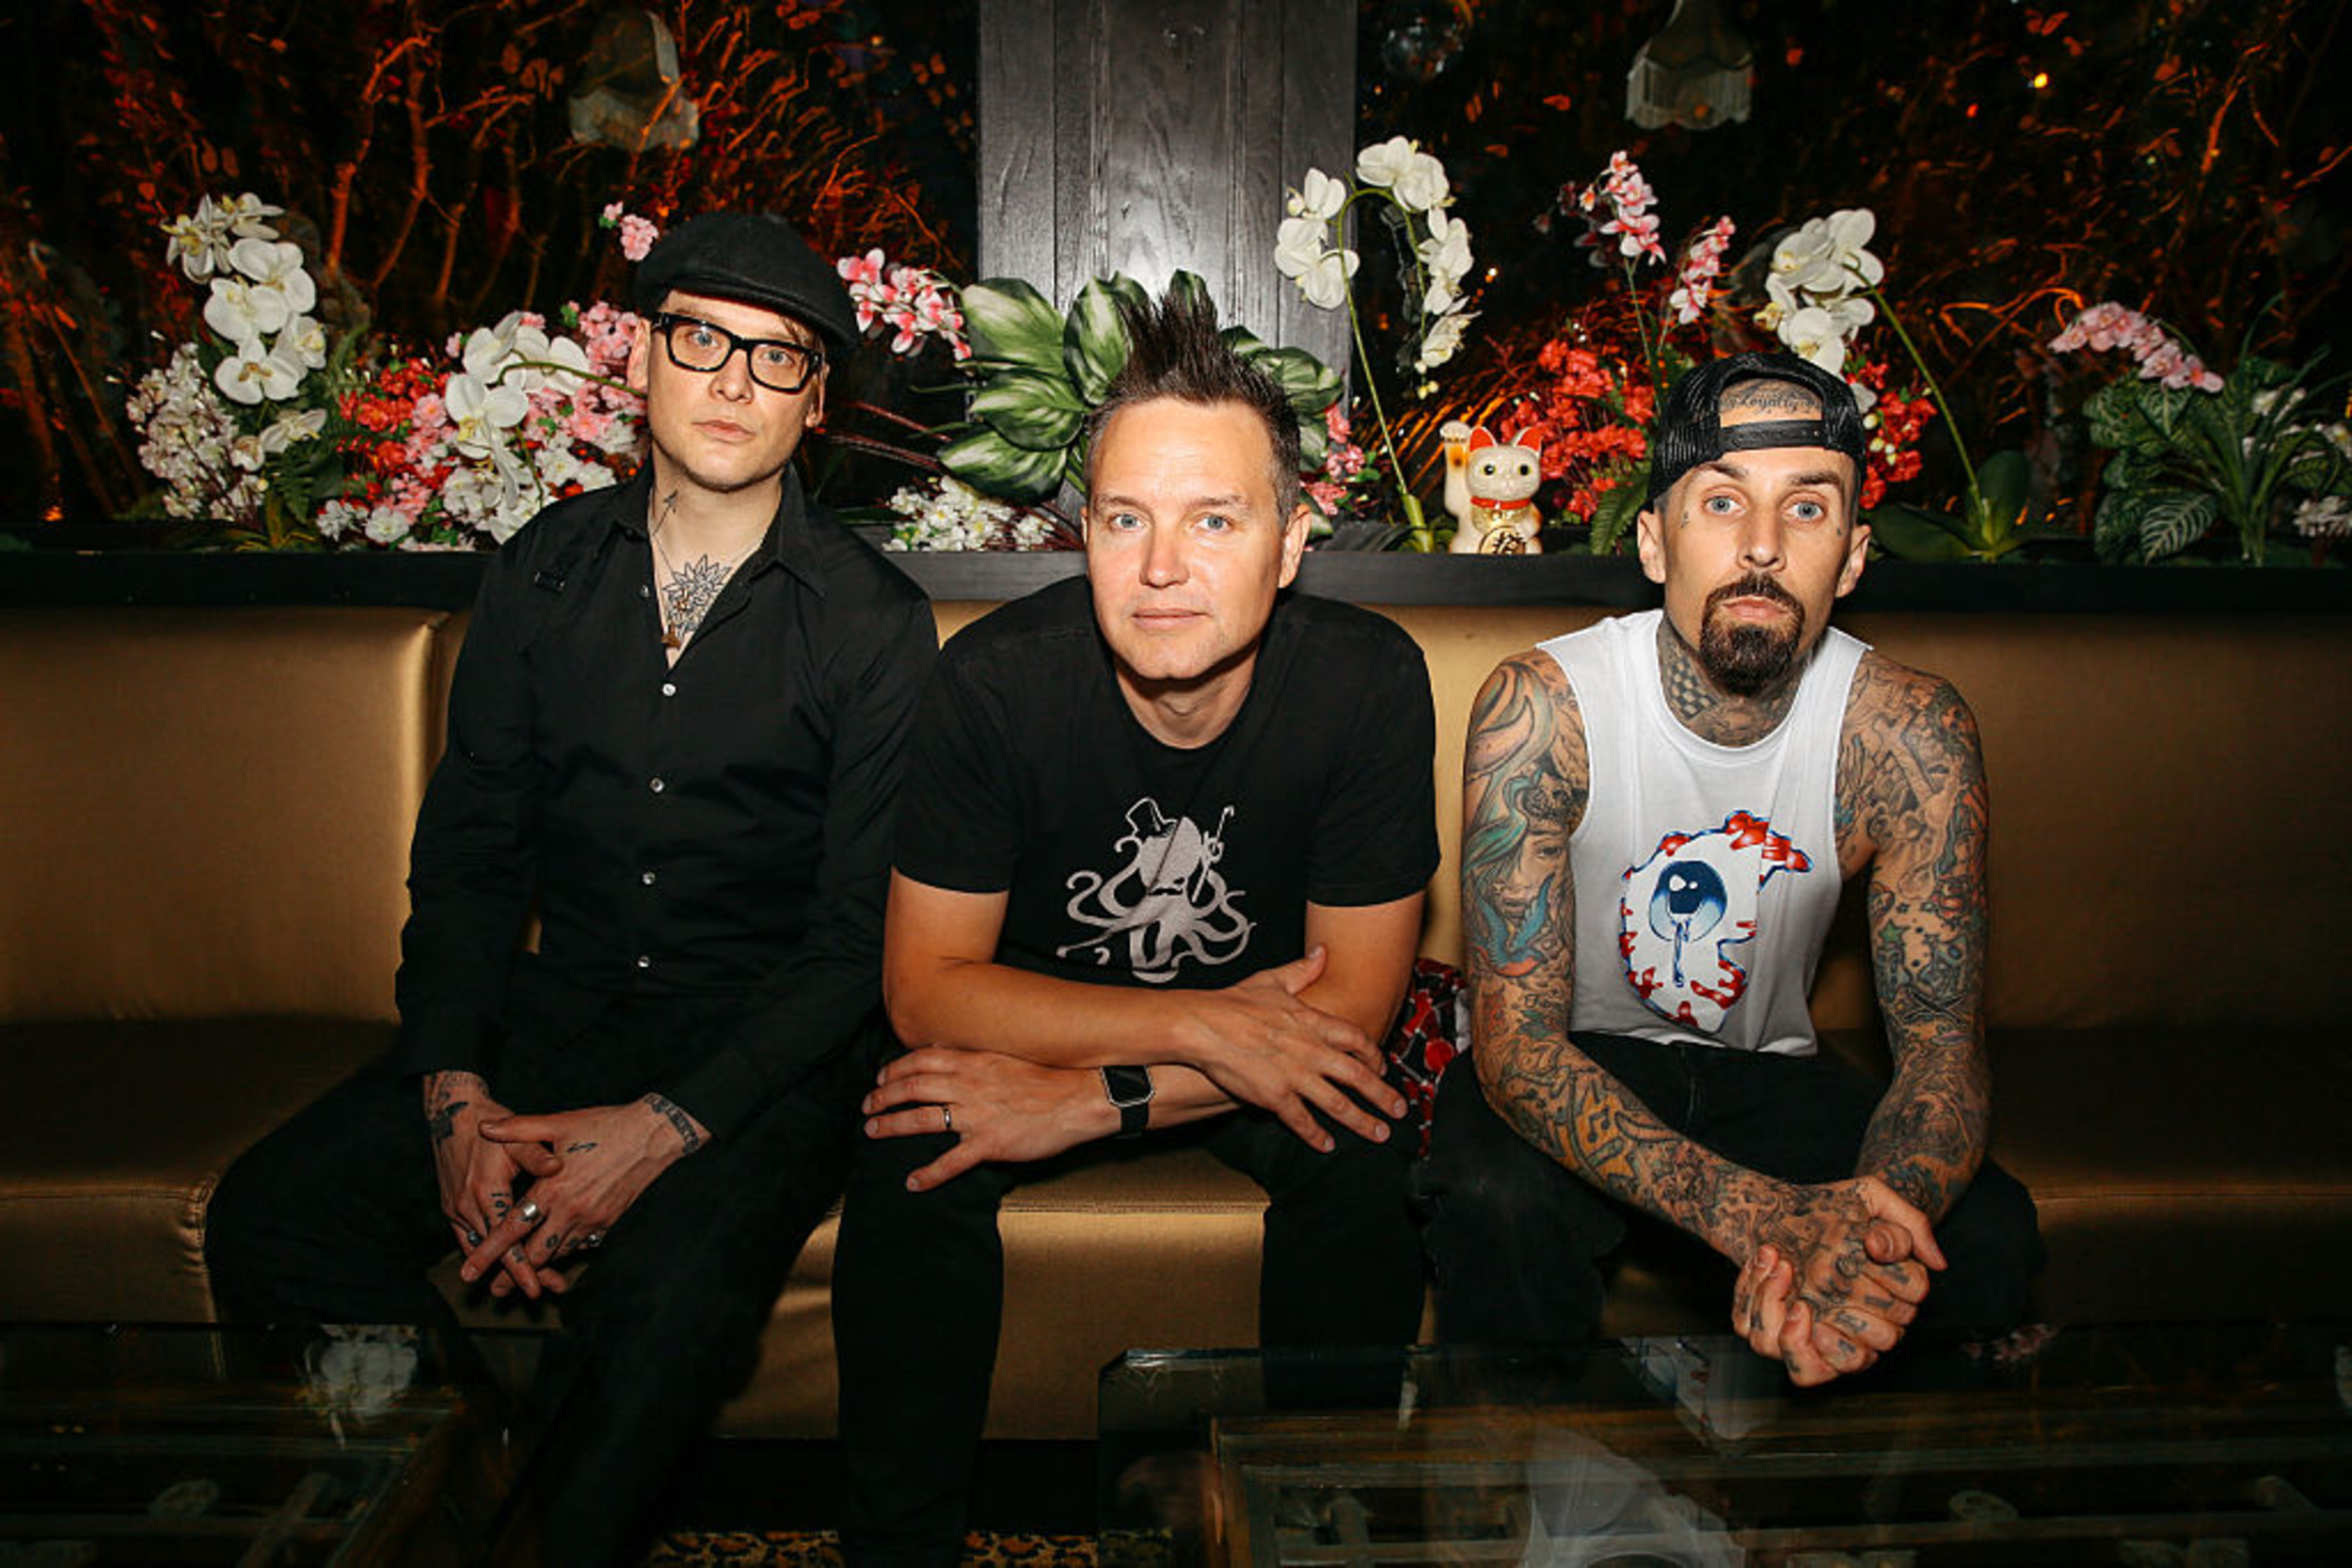 <p>After reuniting at the Coachella Valley Music and Arts Festival, rock band Blink-182 embarked on a tour and plan to make it a second time around. With the release of their latest album<em> One More Time,</em> it’s the perfect time to give their fans another chance to see them across stadiums and arenas worldwide. The tour is set to begin on June 20th in Orlando, Fla., and will end on August 30th in Glasgow, U.K. </p><p><a href='https://www.msn.com/en-us/community/channel/vid-cj9pqbr0vn9in2b6ddcd8sfgpfq6x6utp44fssrv6mc2gtybw0us'>Follow us on MSN to see more of our exclusive entertainment content.</a></p>